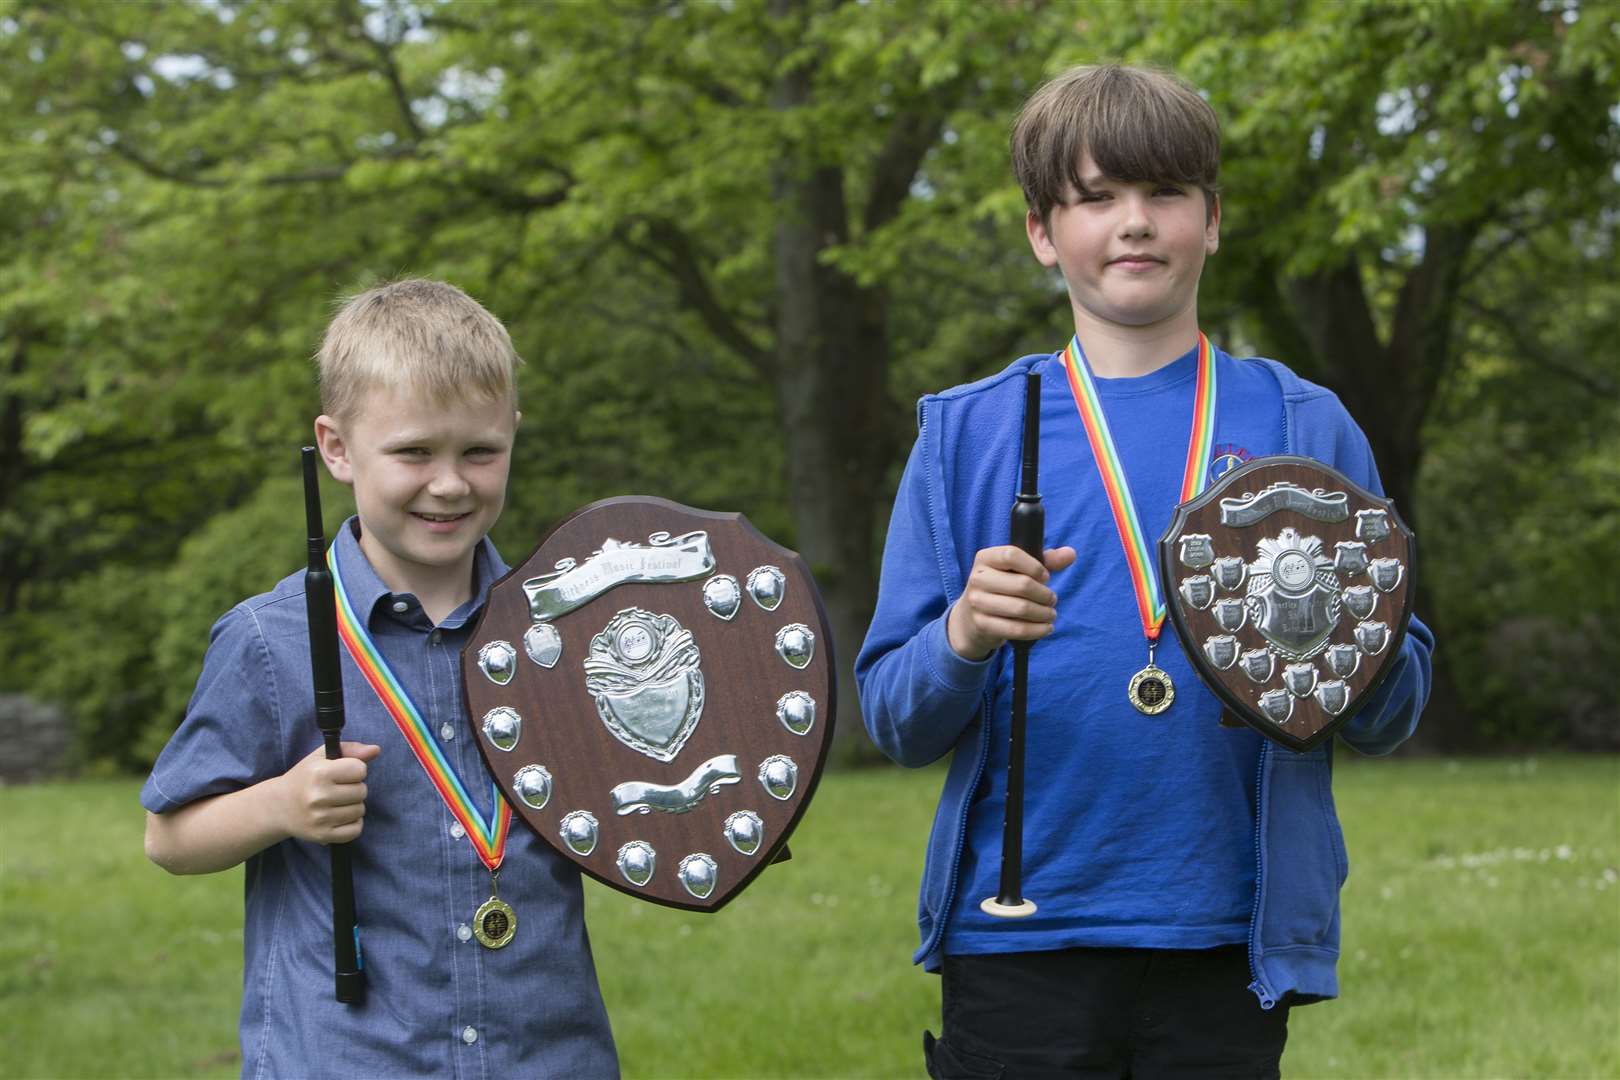 Will Fryer (left), of Latheron, won the Practice Chanter Shield for 10 years and under, while Johnny Bridge, of Miller Academy, received the Practice Chanter Shield for 11 years and over. Picture: Robert MacDonald / Northern Studios